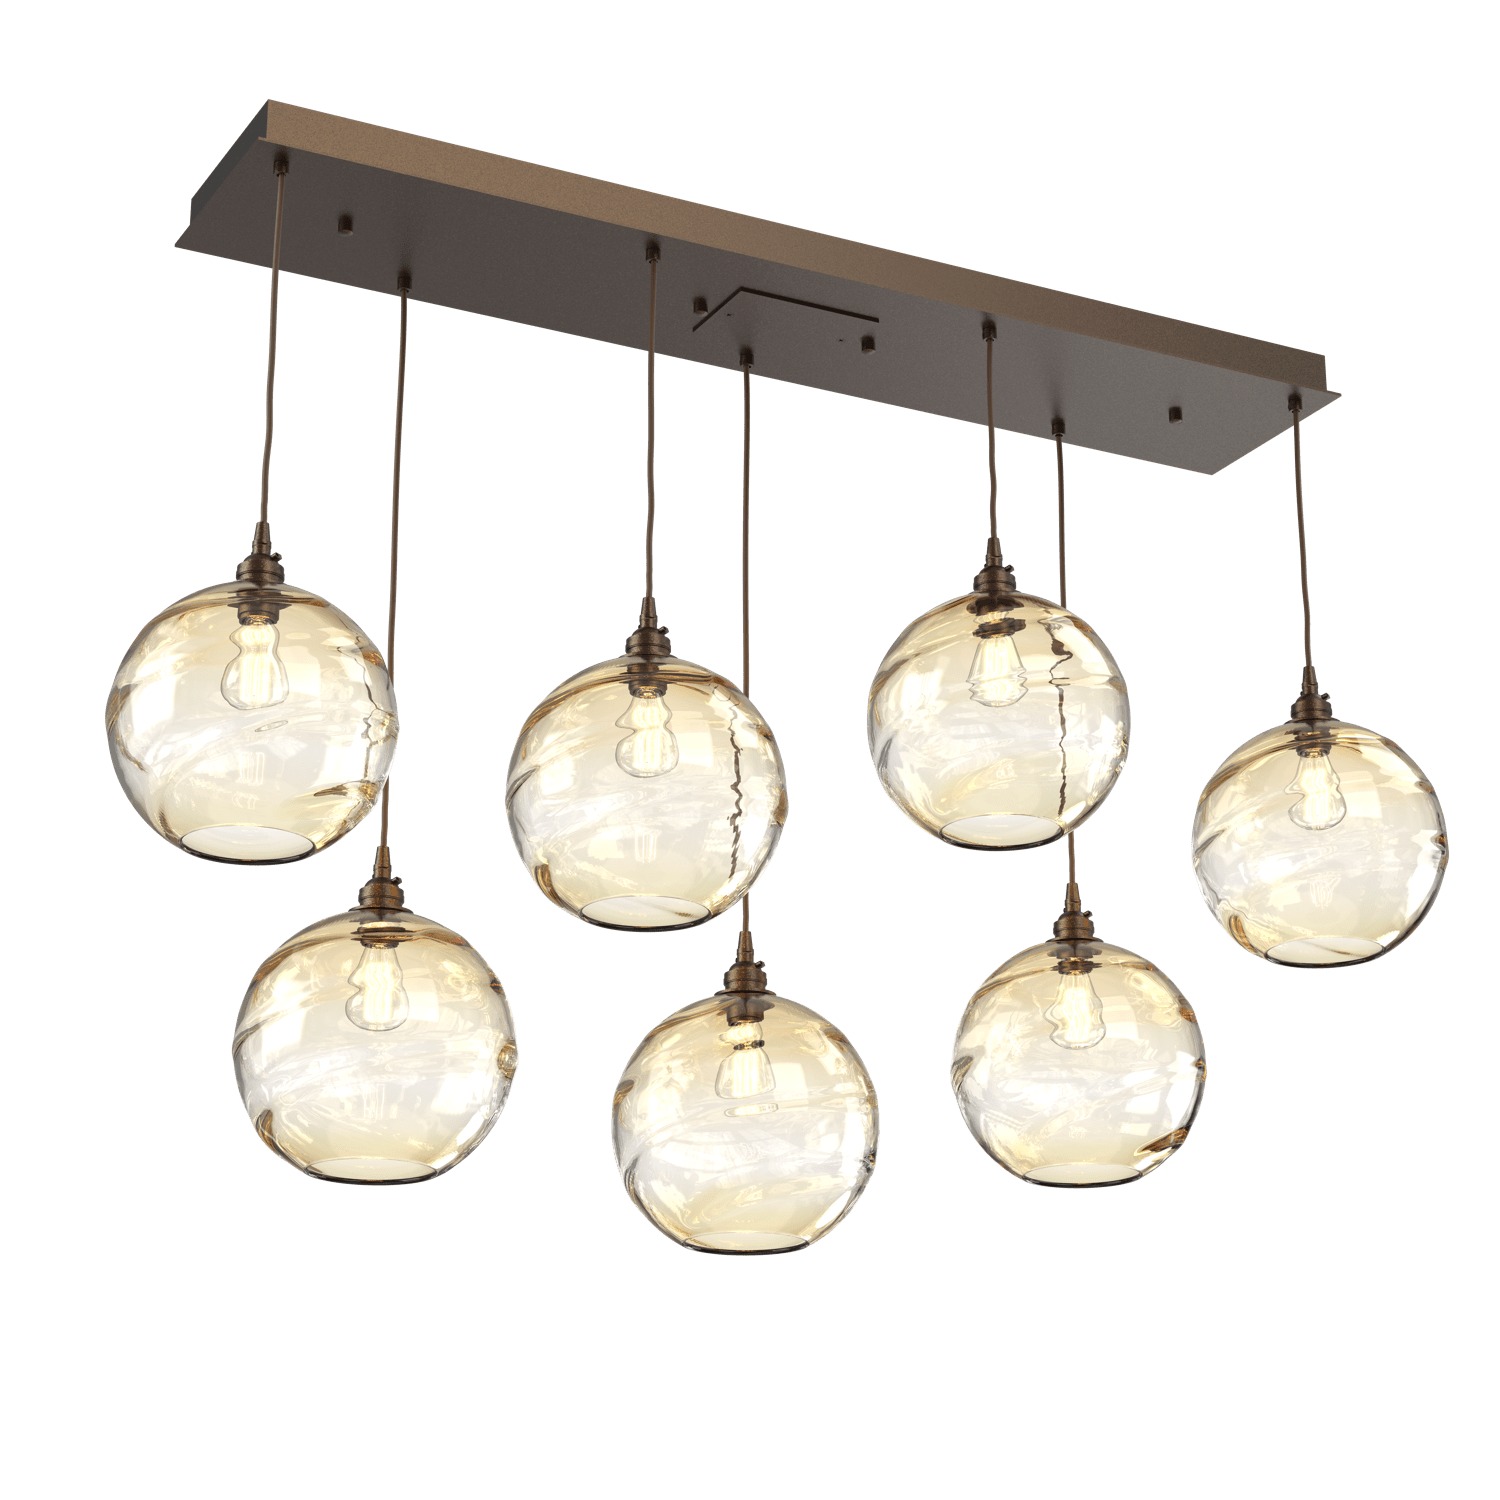 PLB0047-07-FB-OA-Hammerton-Studio-Optic-Blown-Glass-Terra-7-light-linear-pendant-chandelier-with-flat-bronze-finish-and-optic-amber-blown-glass-shades-and-incandescent-lamping